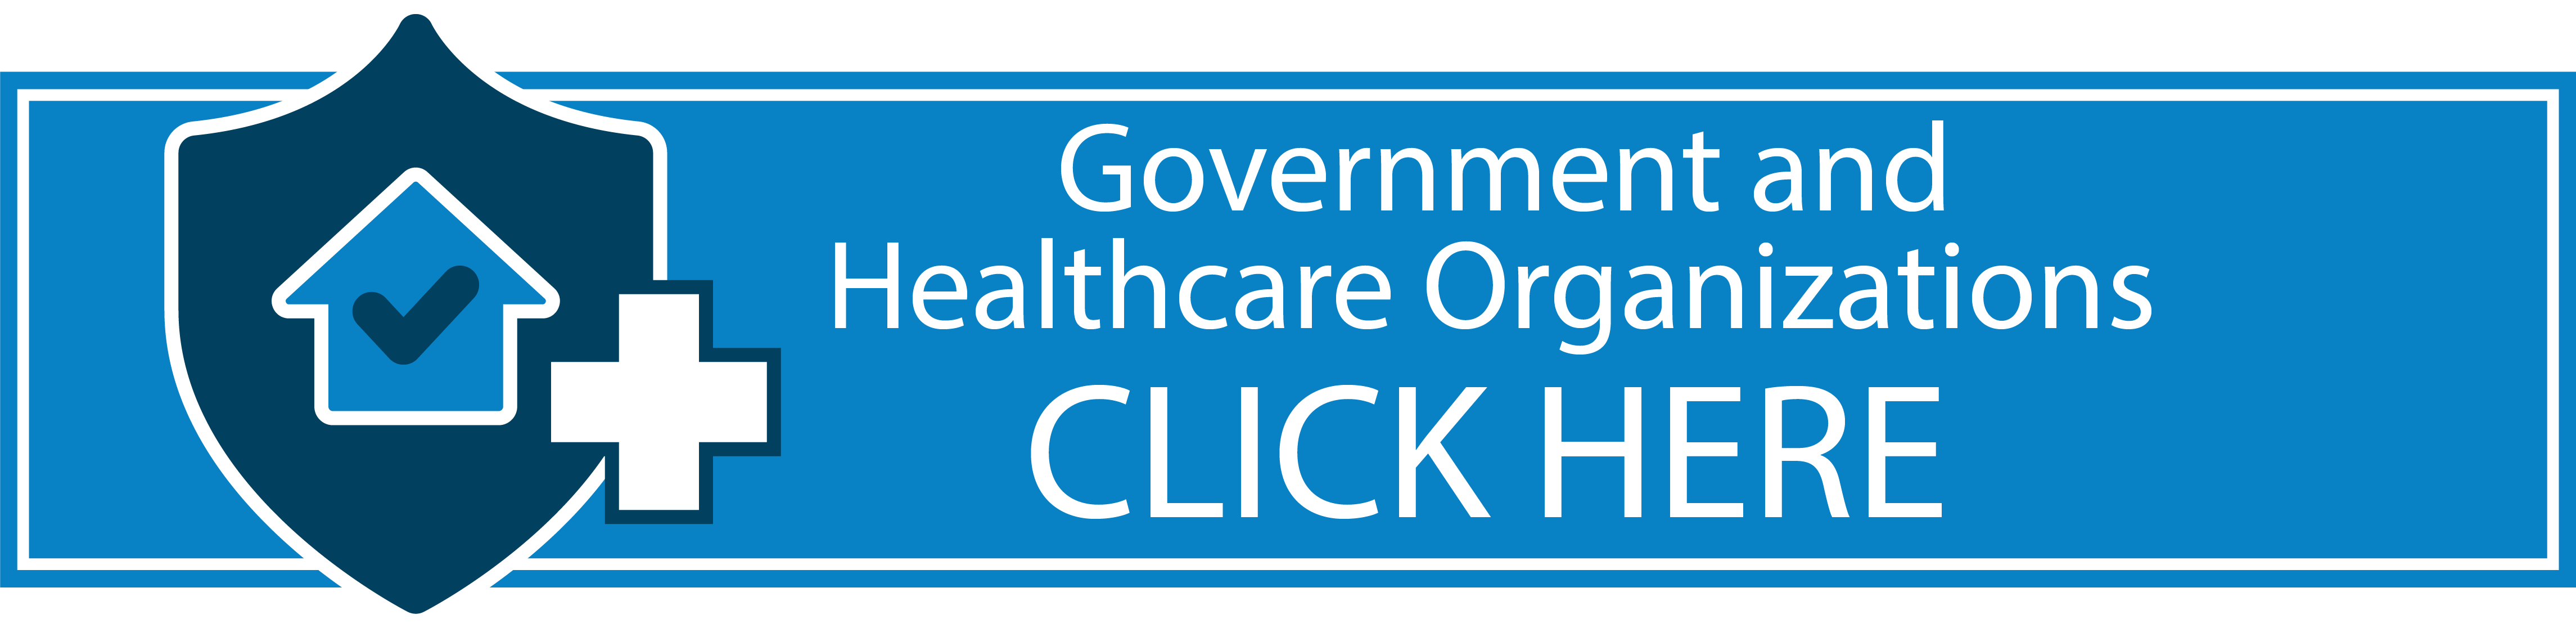 Government and Healthcare Contact Us